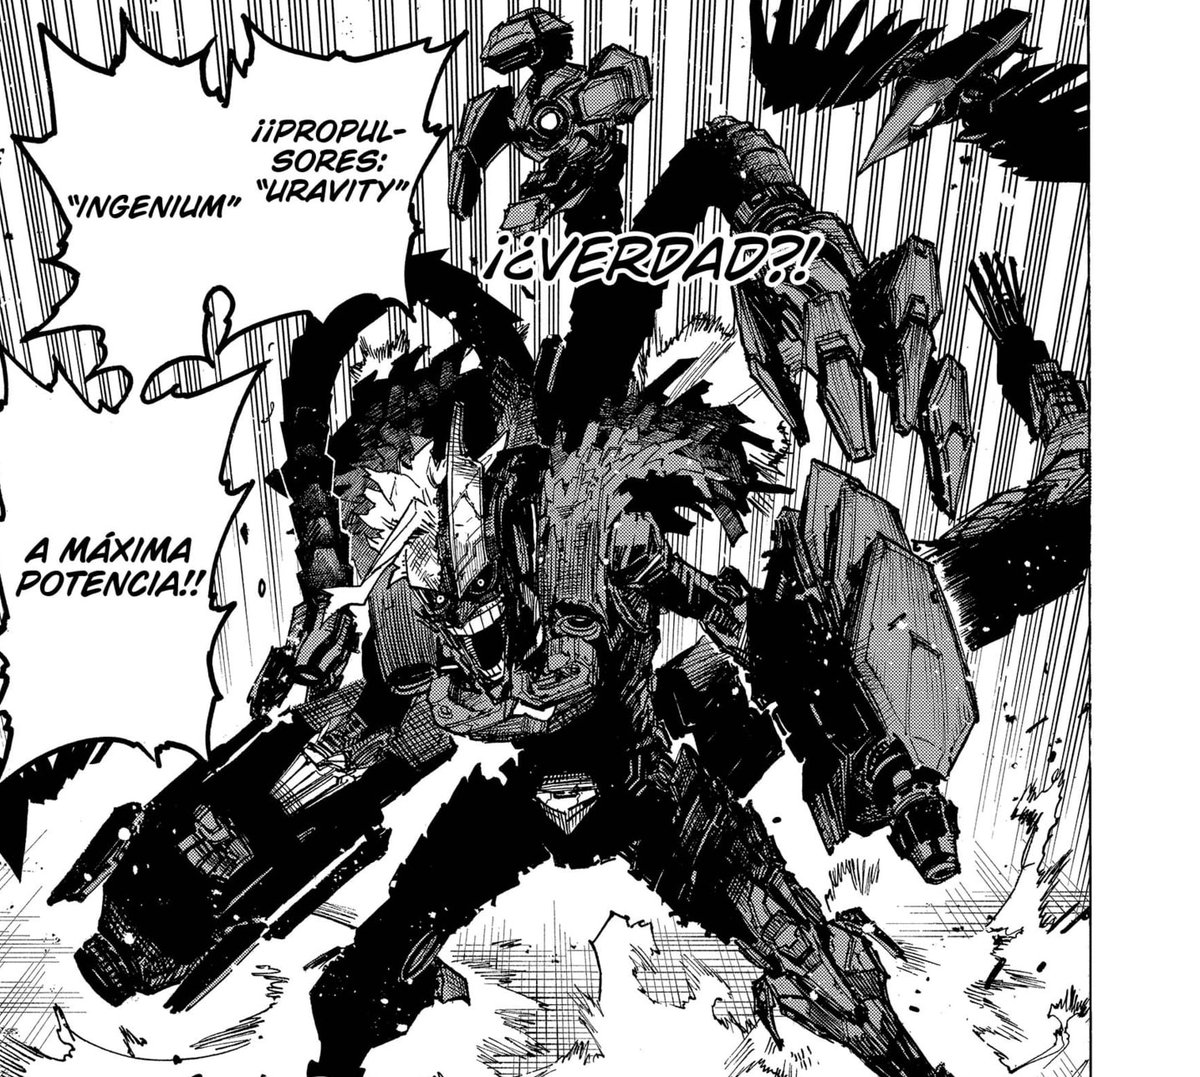 The little bird is gonna be Koda, the hands Shoji/Hagakure's flash, the arms could be a flamethrower for Shoto (maybe he has nitrogen or smth else for cold too?), the tail is Ojiro, and I'm expecting AP shot for Bakugo but he could have something to detonate too. 